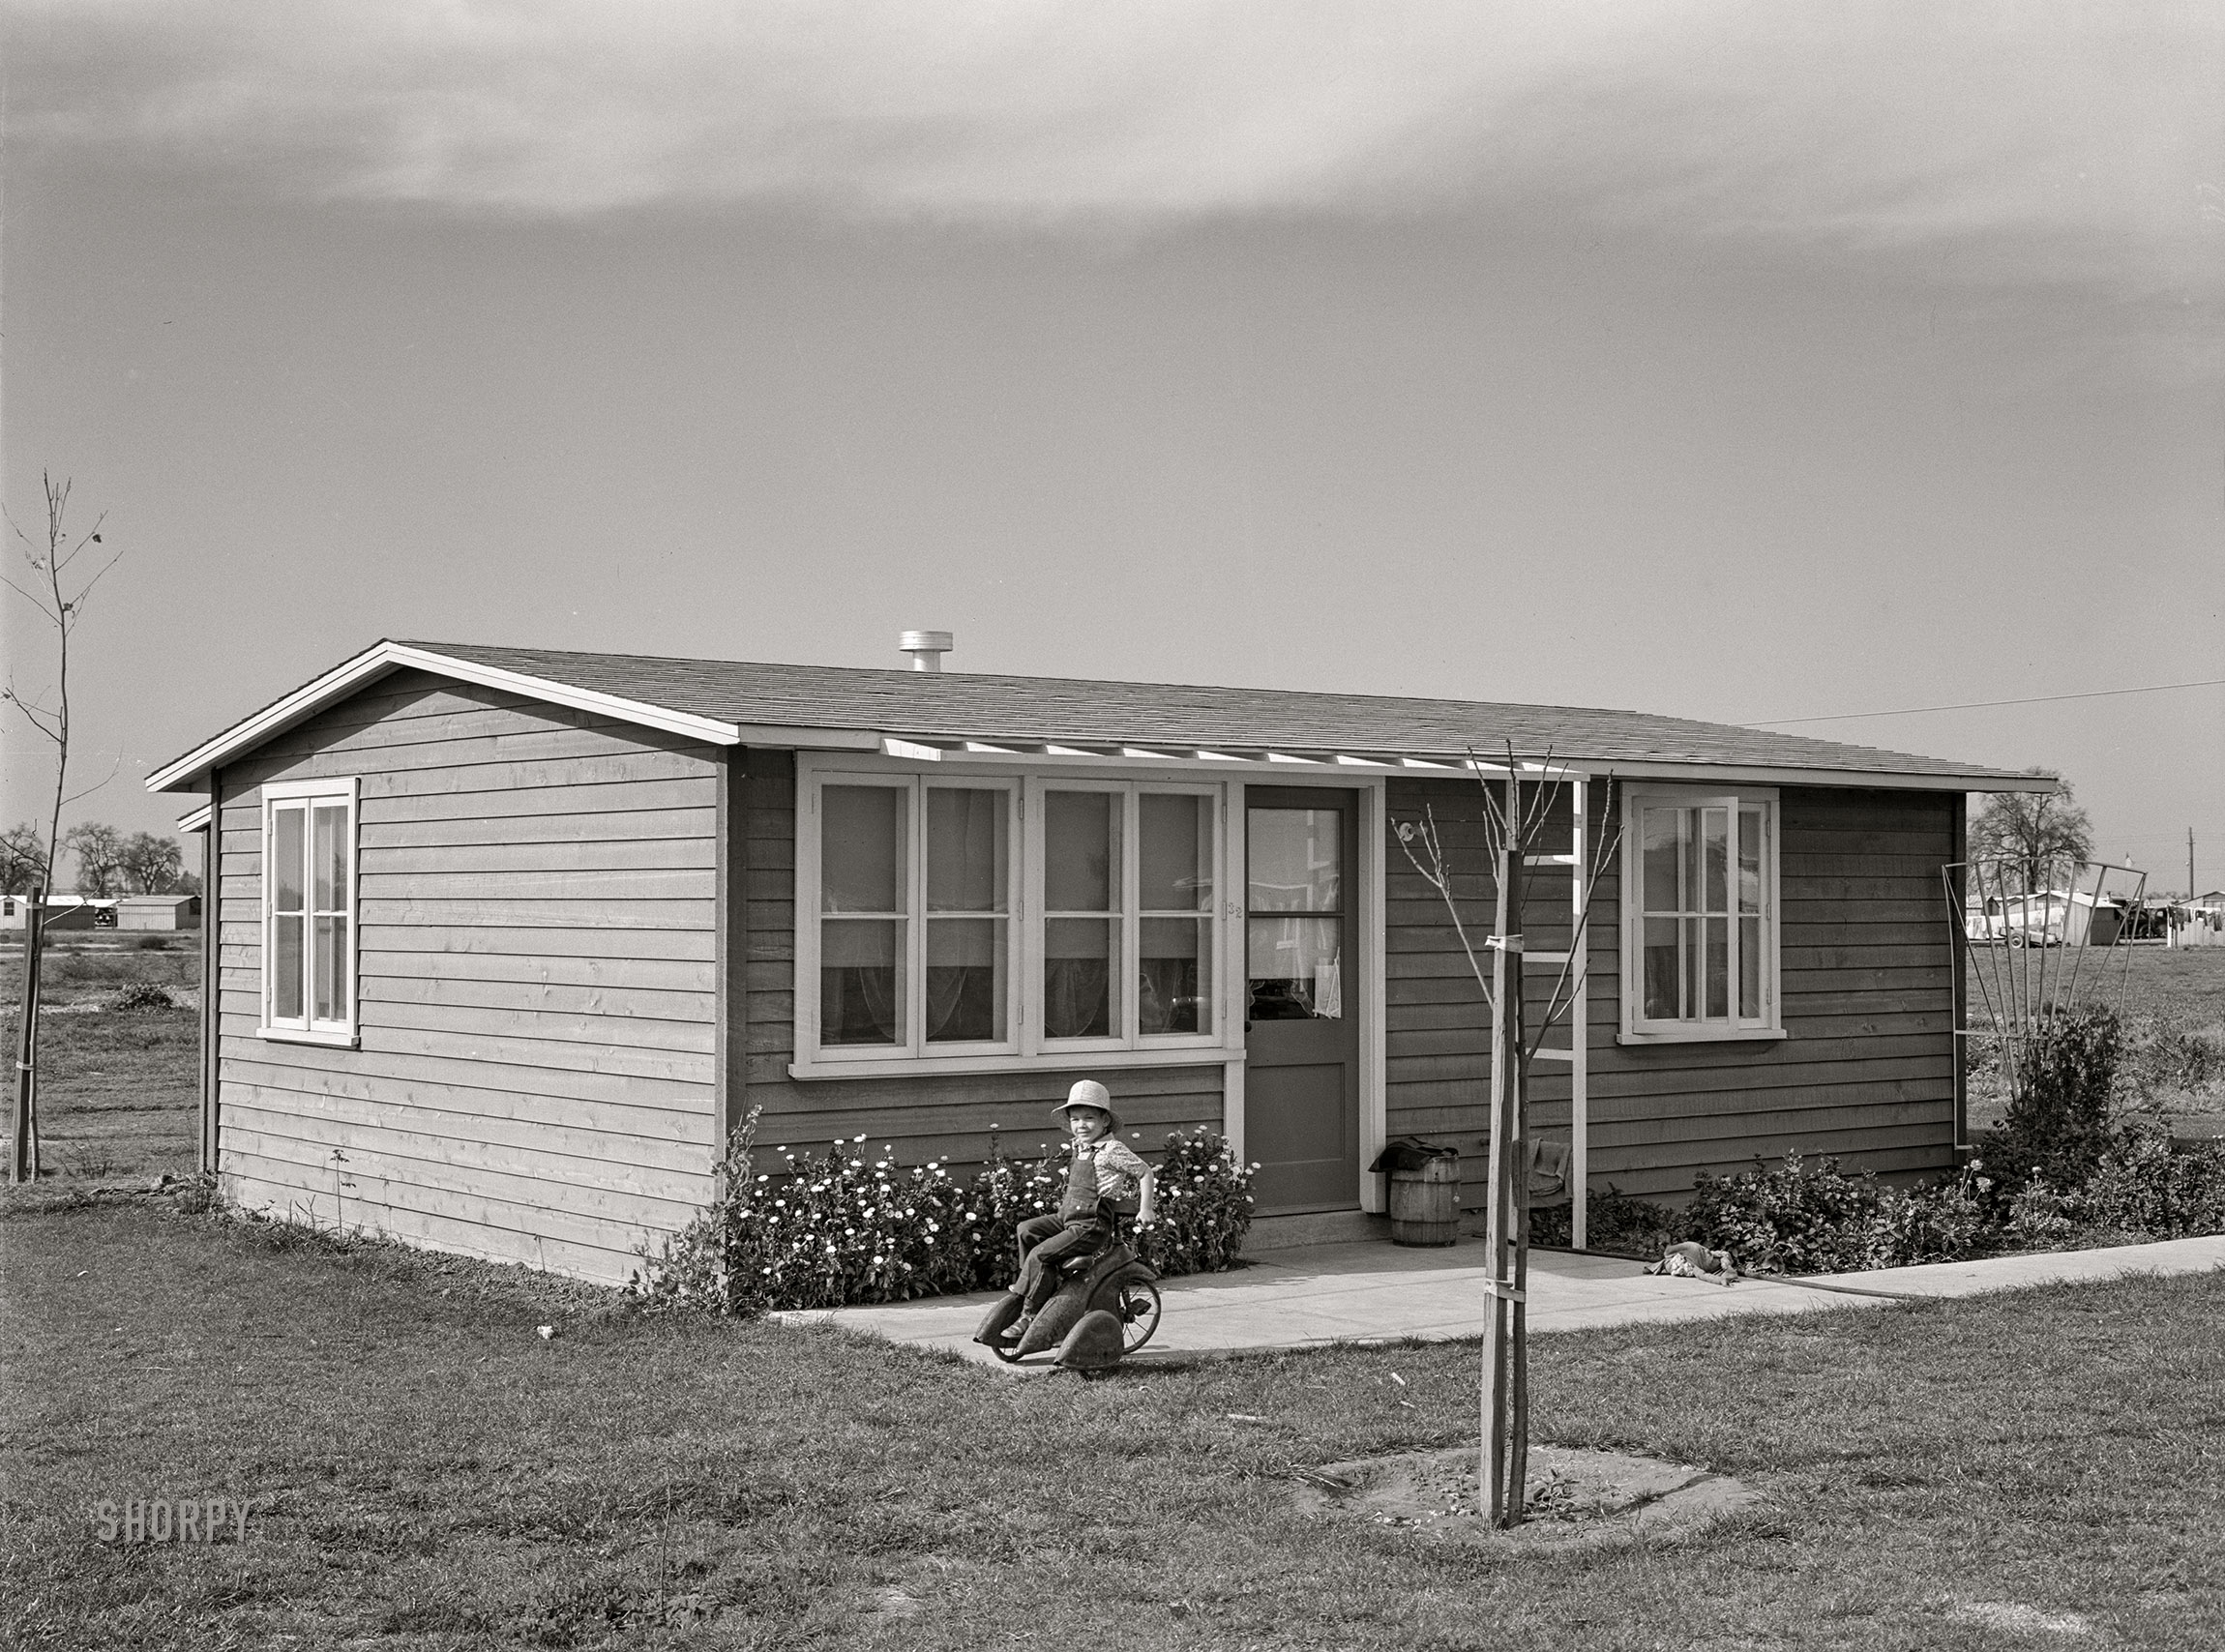 February 1942. Woodville, Calif. "FSA farm workers' community. Son of agricultural worker at their garden house." Photo by Russell Lee for the Farm Security Administration. View full size.